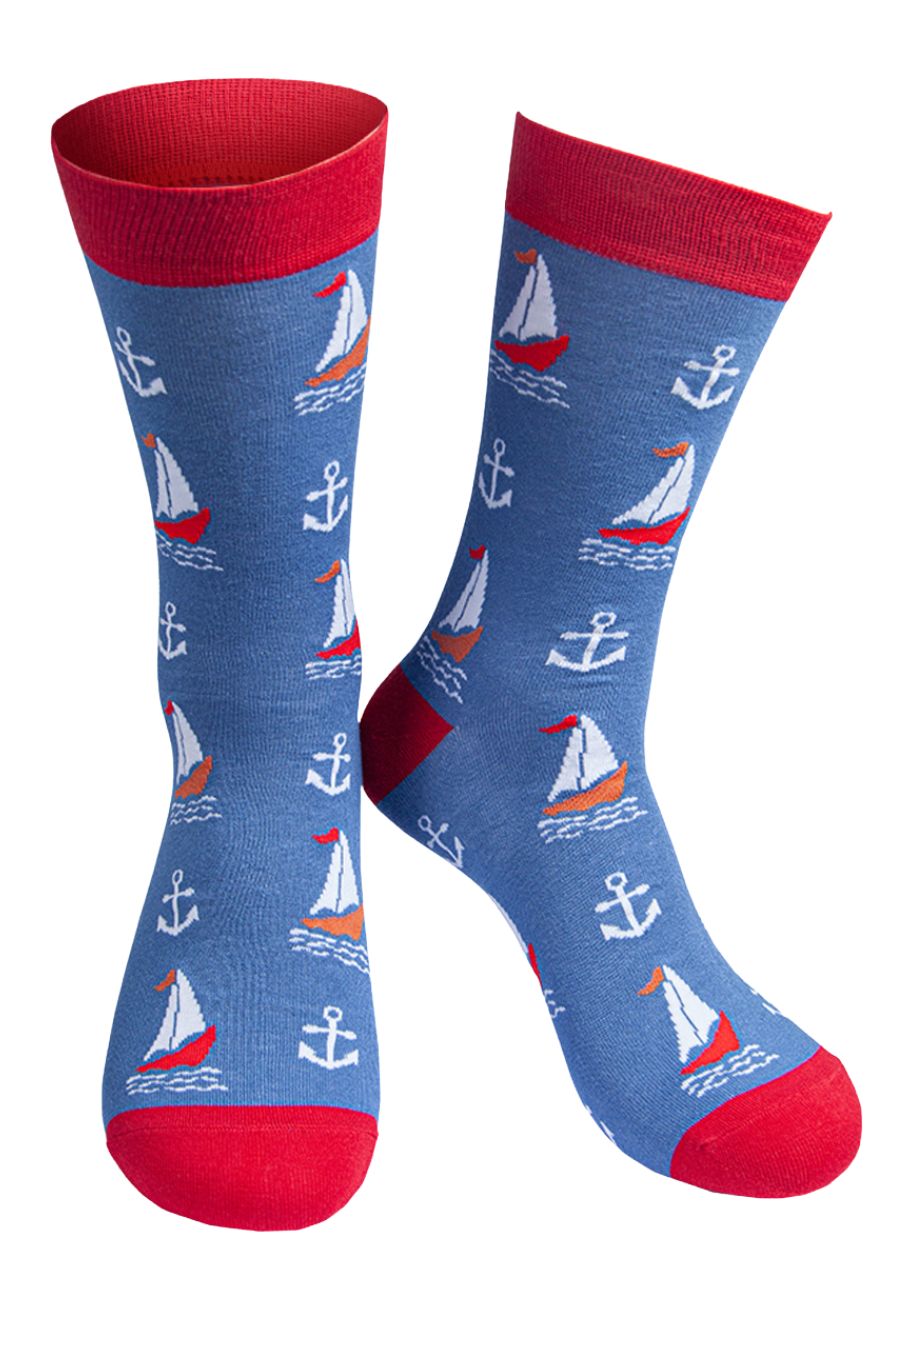 Mens blue bamboo socks with red toes and cuffs. Featuring sailing boat and anchors